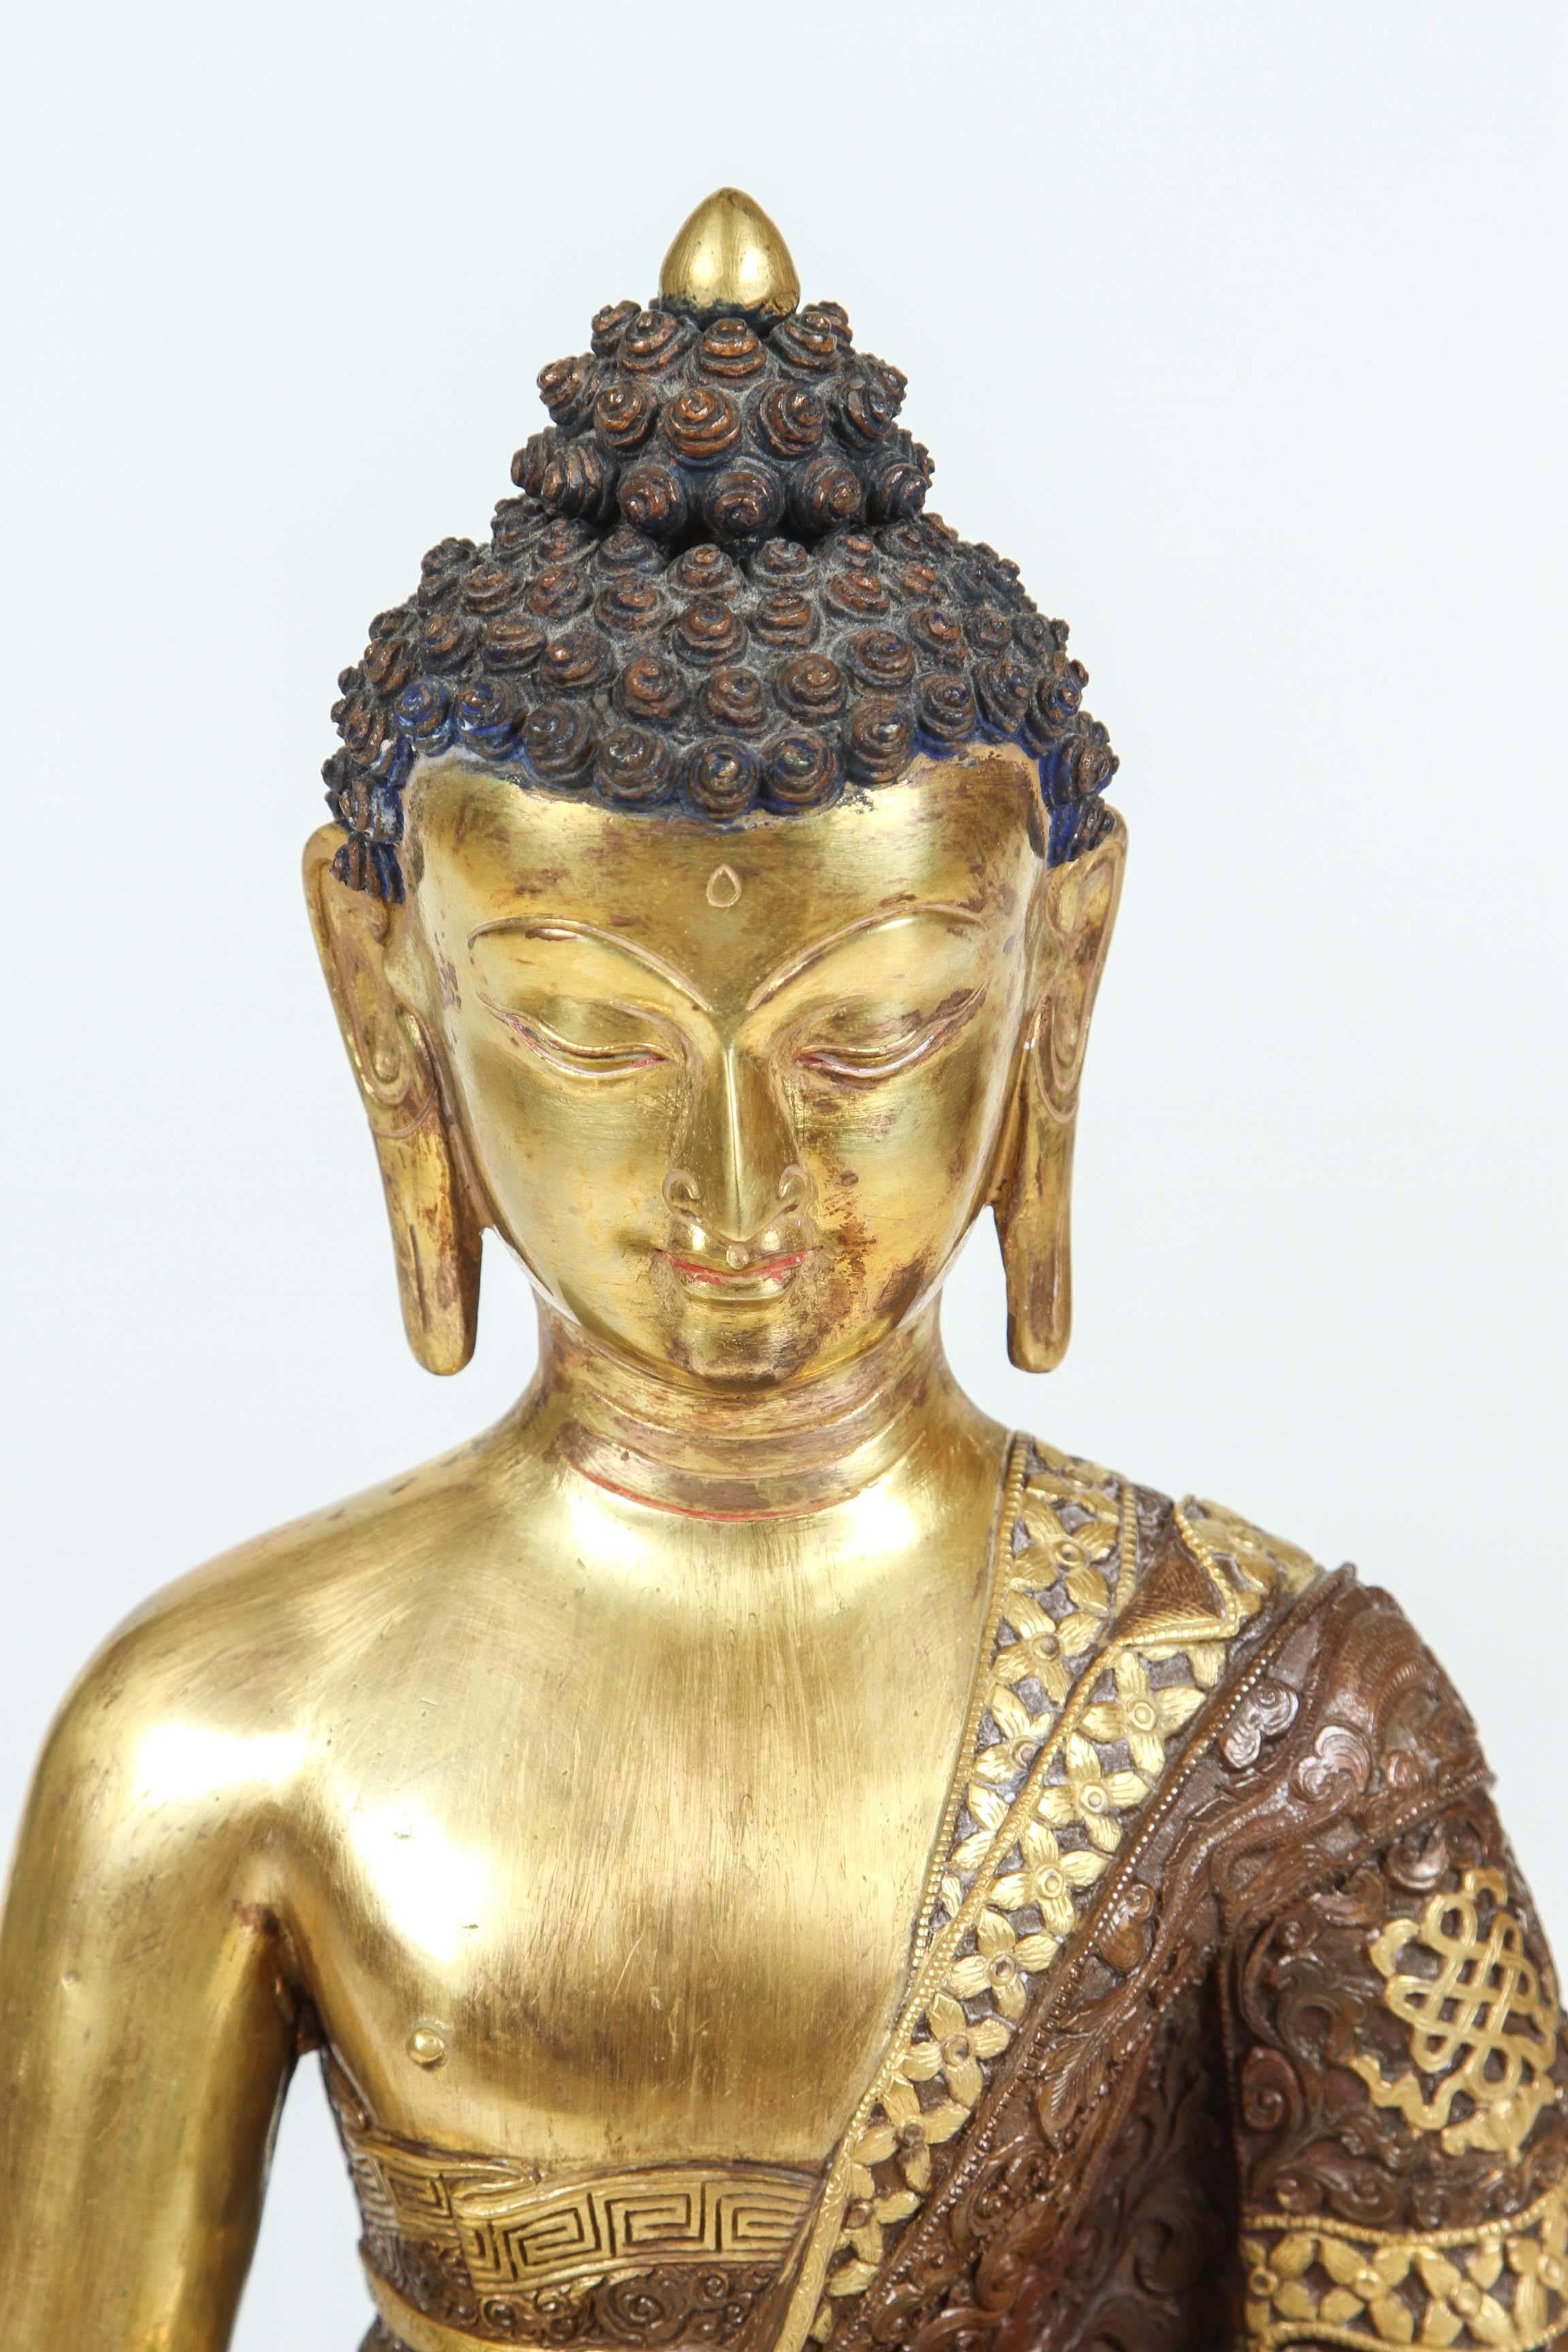 Brass Nepalese Buddha statue. Bhumisparsha Mudra.
Cast iron, handcrafted and handprinted with very intricate details
You can use it outside with no fear of rusting .
Add light and serenity to any interior or exterior. 
Seated in dhyanasana cross